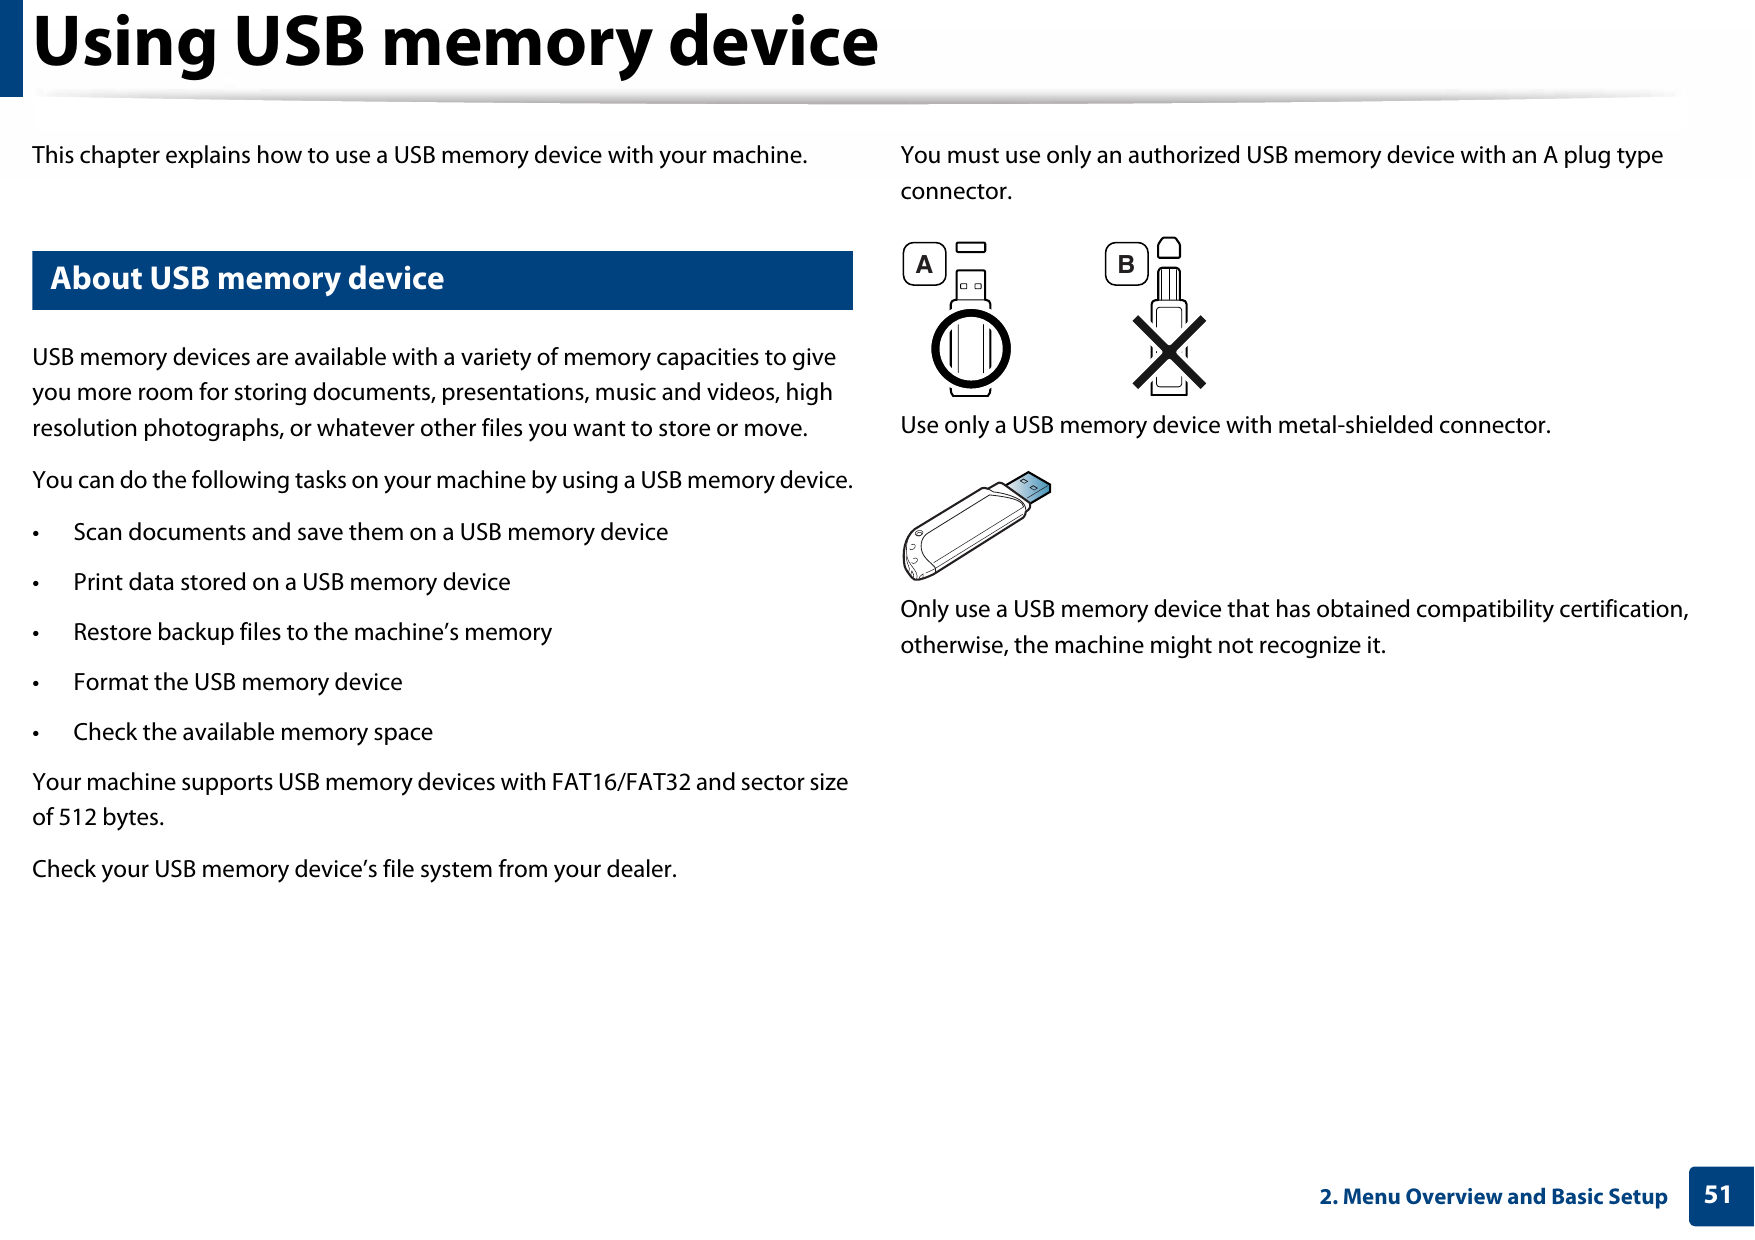 512. Menu Overview and Basic SetupUsing USB memory deviceThis chapter explains how to use a USB memory device with your machine.13 About USB memory deviceUSB memory devices are available with a variety of memory capacities to give you more room for storing documents, presentations, music and videos, high resolution photographs, or whatever other files you want to store or move.You can do the following tasks on your machine by using a USB memory device.• Scan documents and save them on a USB memory device• Print data stored on a USB memory device• Restore backup files to the machine’s memory• Format the USB memory device• Check the available memory spaceYour machine supports USB memory devices with FAT16/FAT32 and sector size of 512 bytes.Check your USB memory device’s file system from your dealer.You must use only an authorized USB memory device with an A plug type connector.Use only a USB memory device with metal-shielded connector.Only use a USB memory device that has obtained compatibility certification, otherwise, the machine might not recognize it.A B